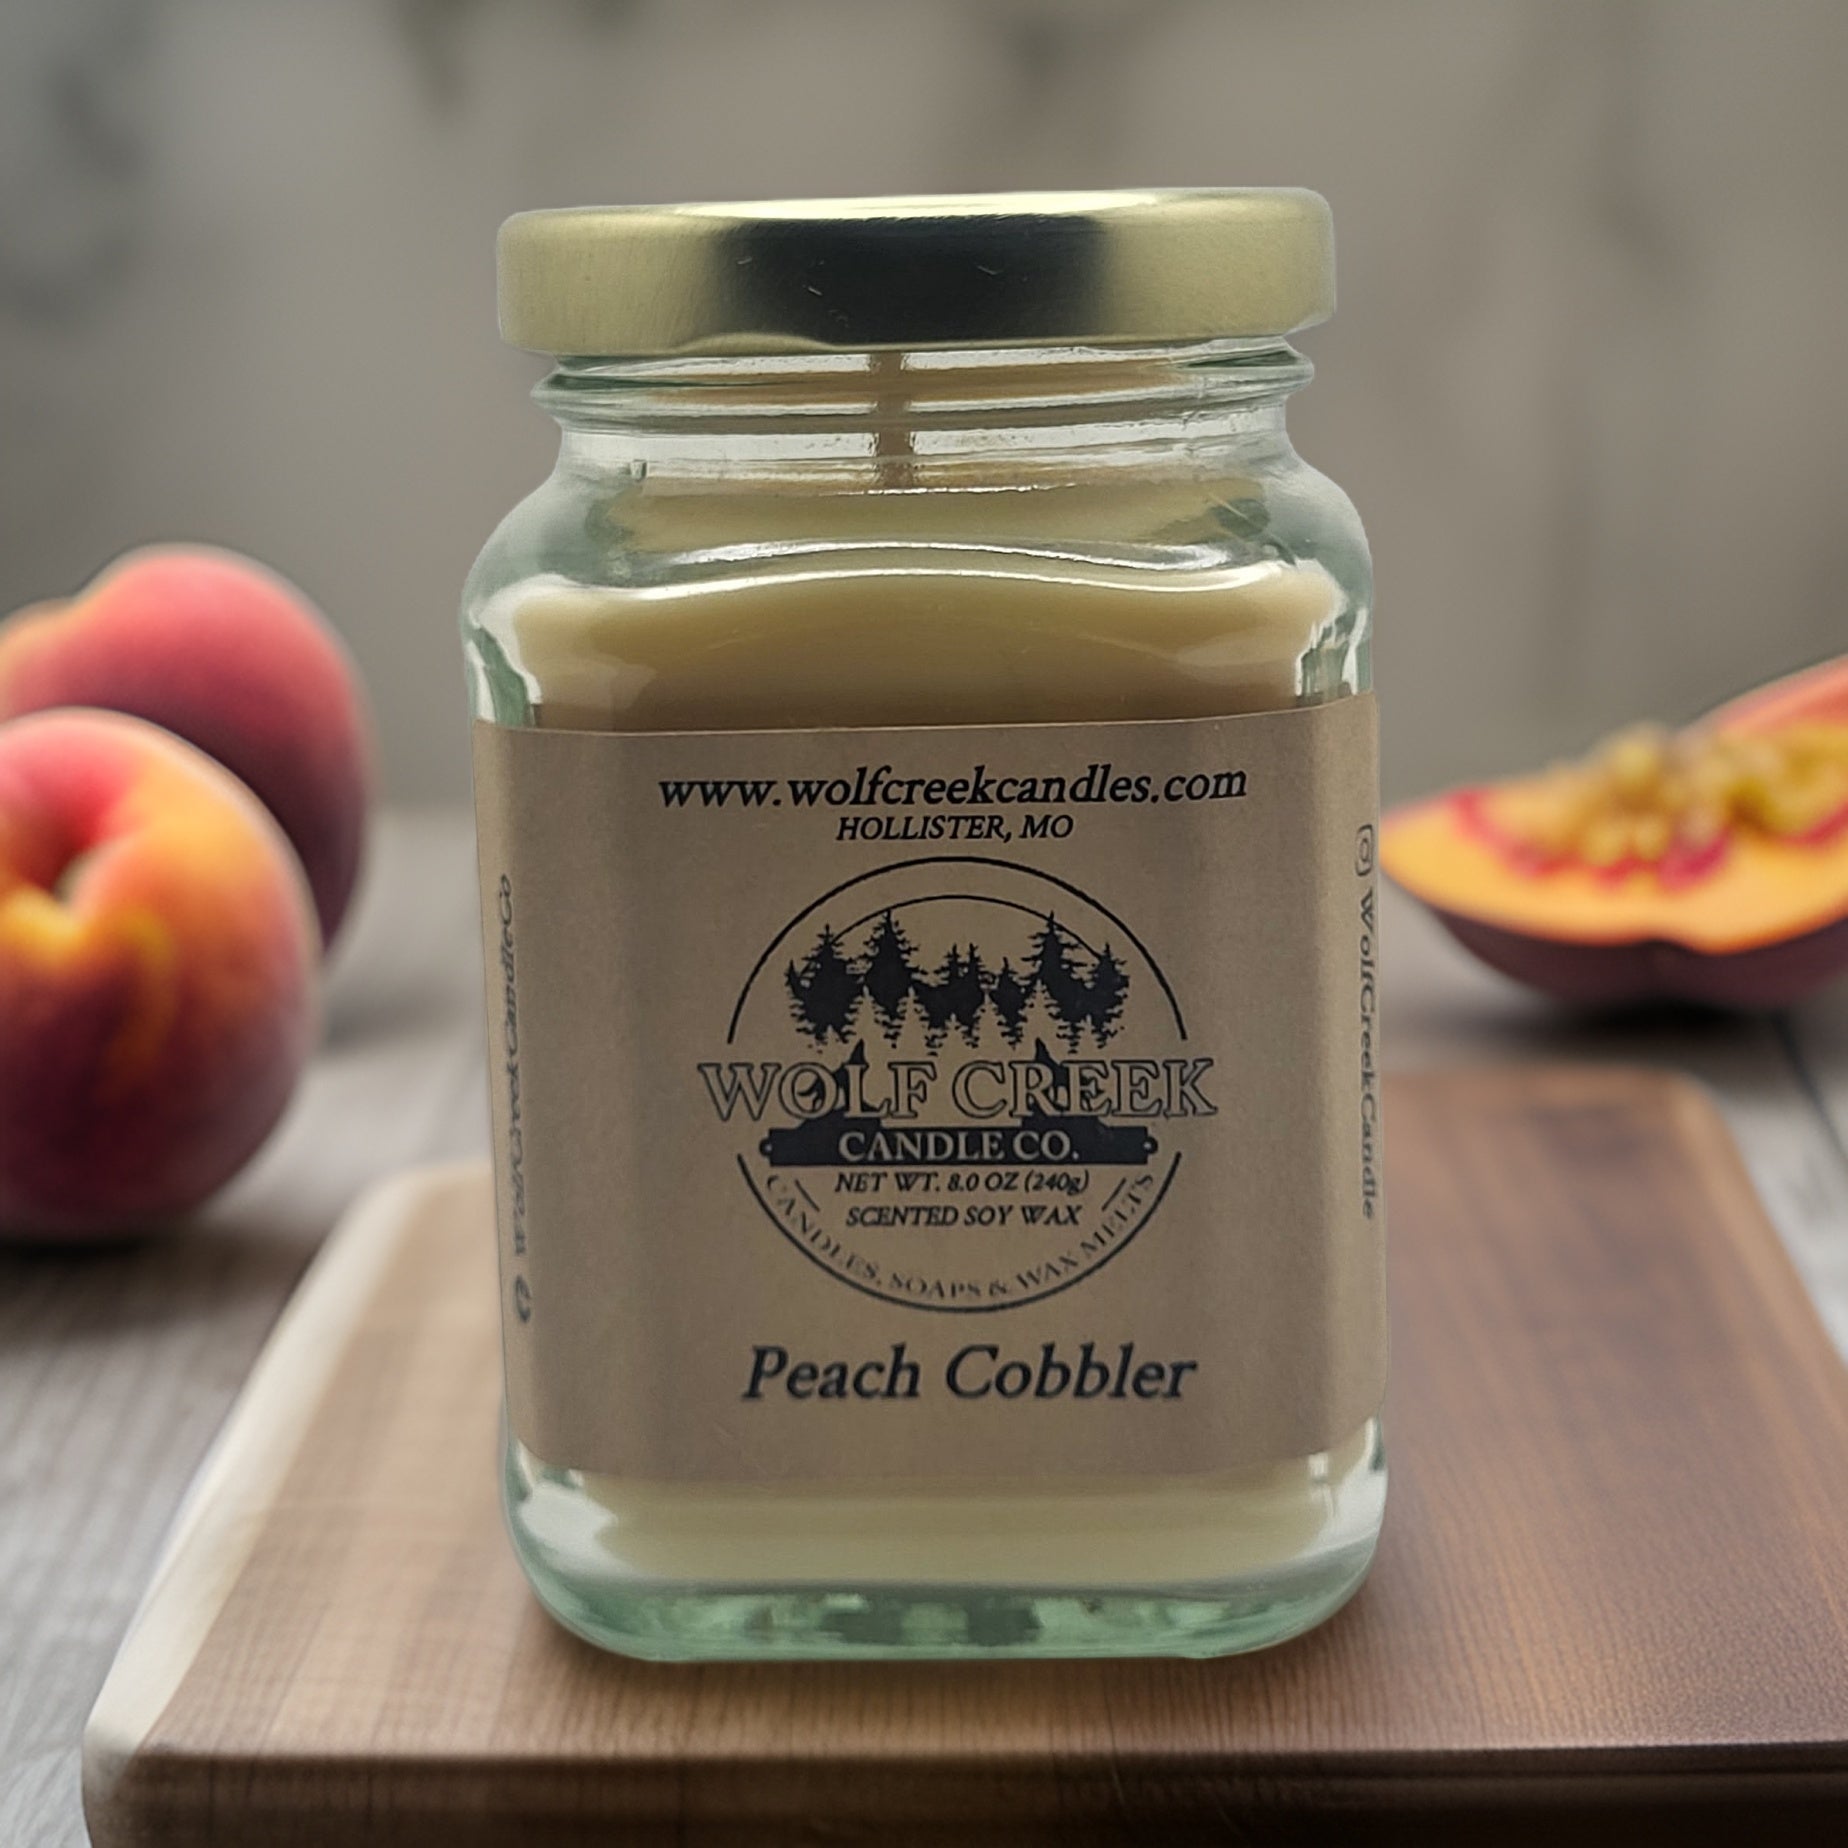 Peach Cobbler Soy Candle - Wolf Creek Candle Co.